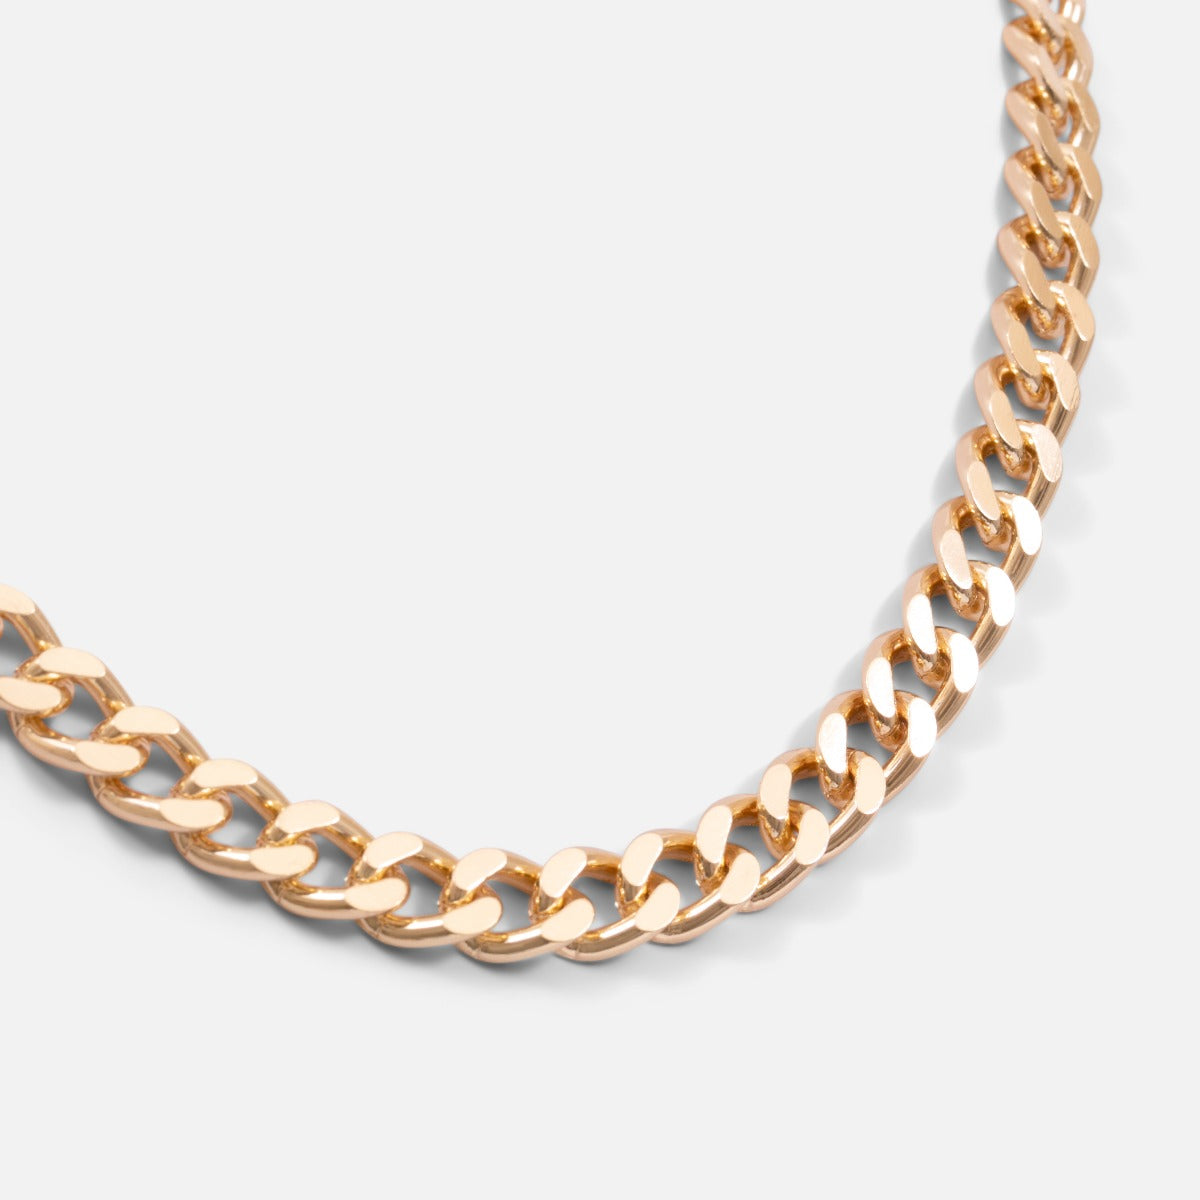 Golden necklace with wide links 